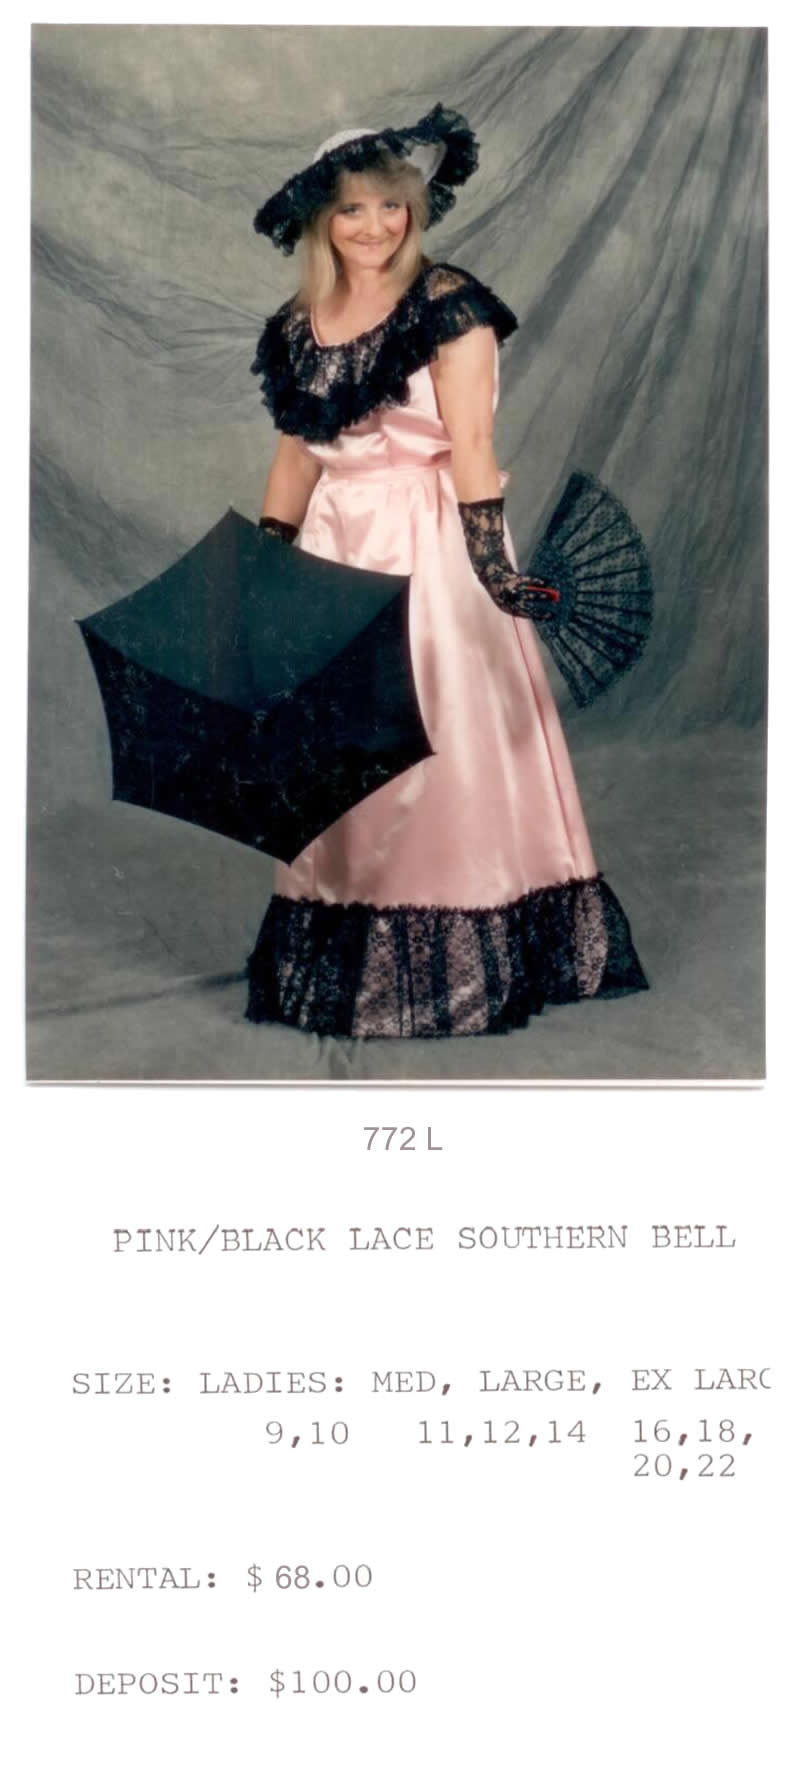 SOUTHERN BELL - PINK-BLACK LACE